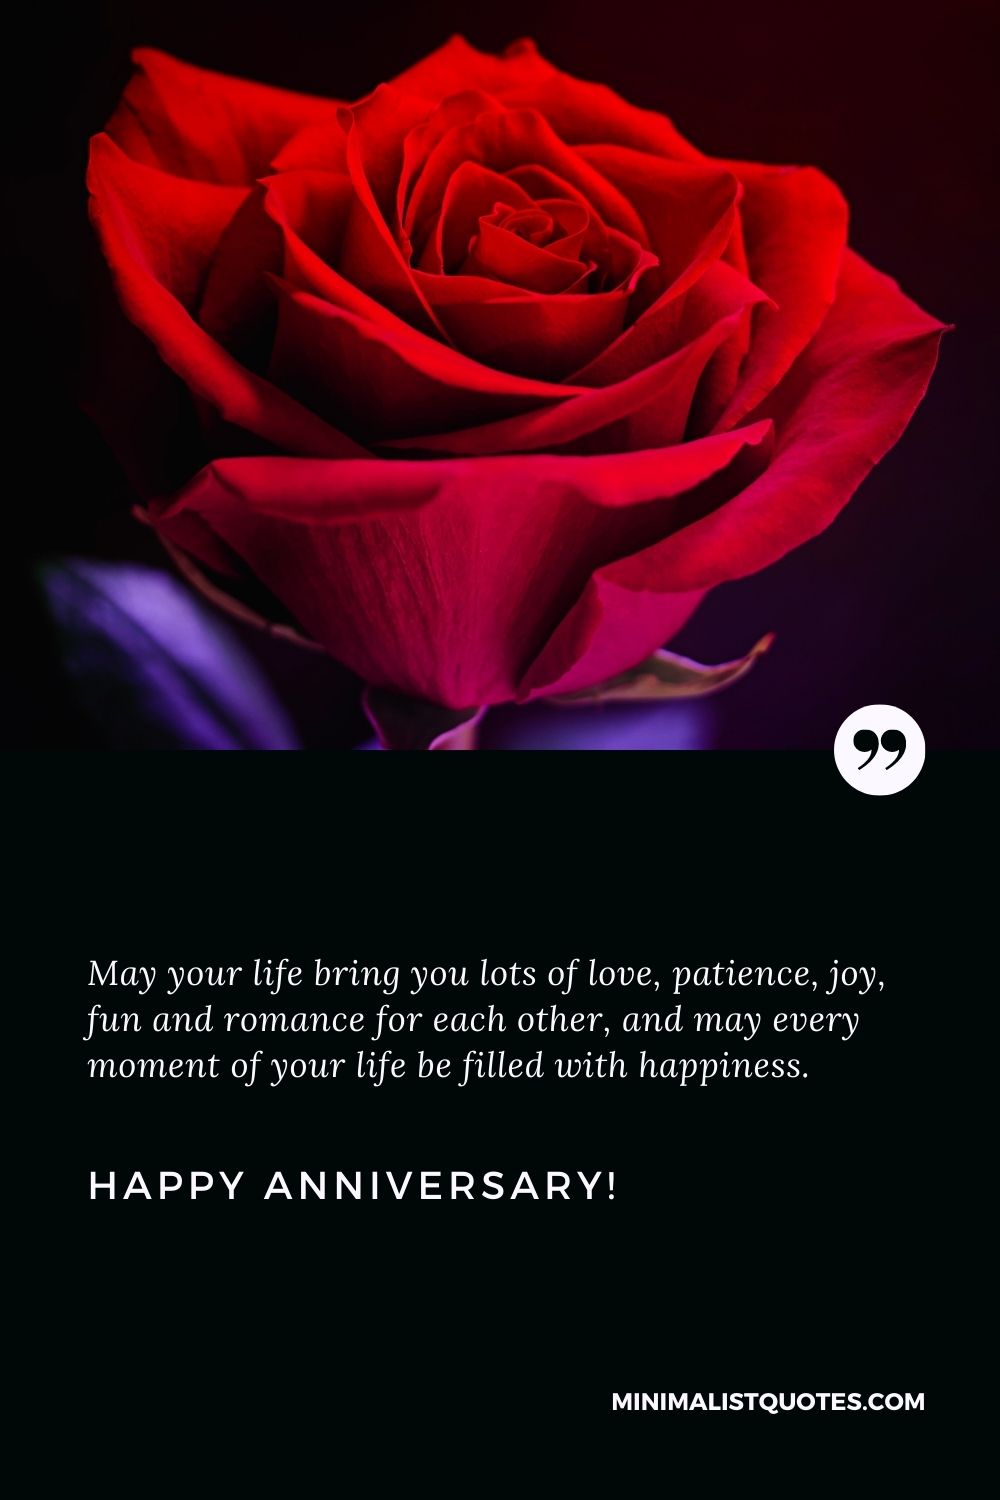 Anniversary quotes for couple: May your life bring you lots of love, patience, joy, fun and romance for each other, and may every moment of your life be filled with happiness. Happy Anniversary!